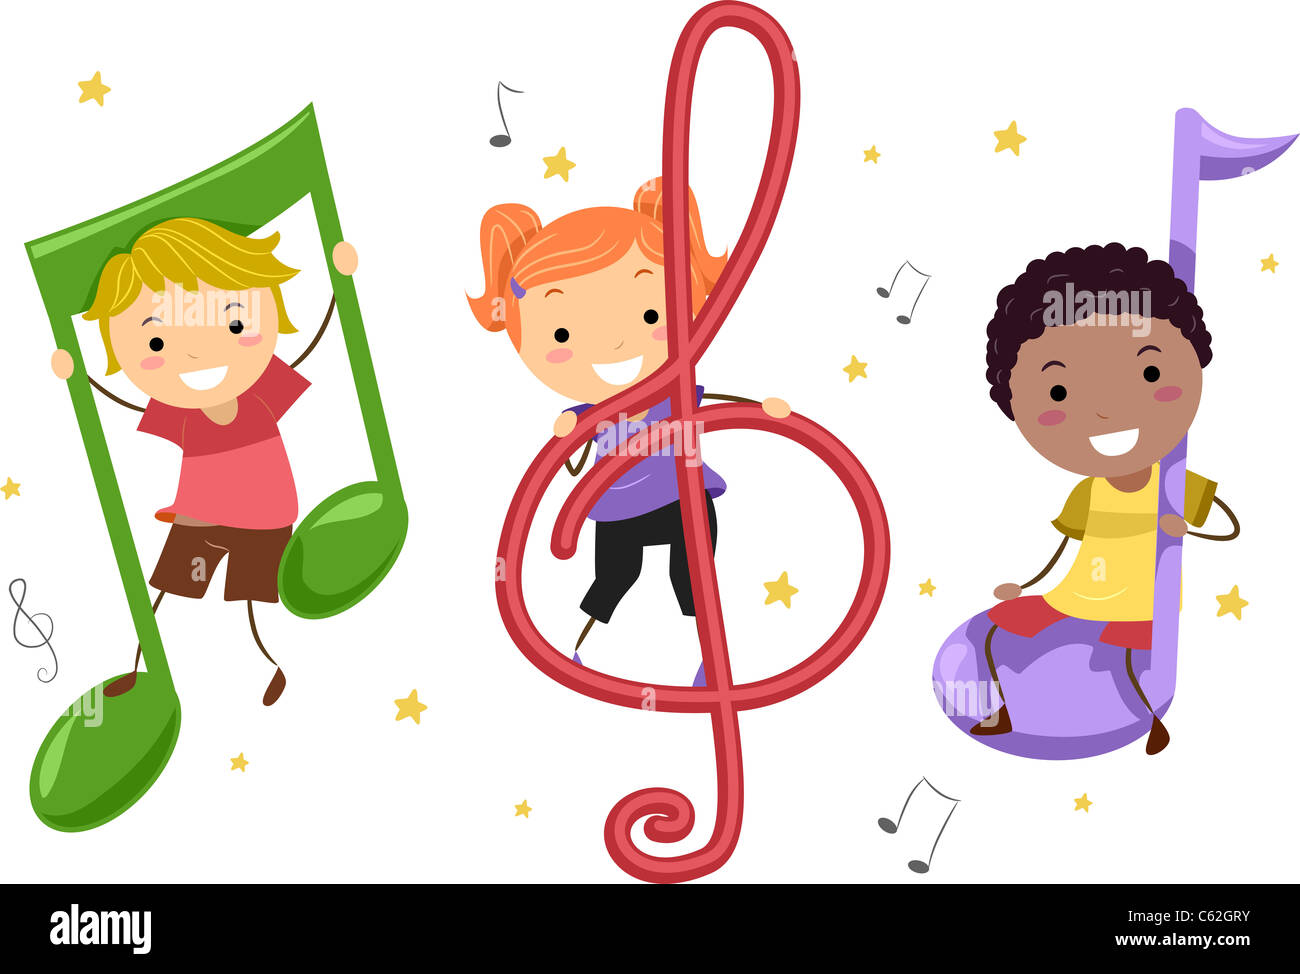 kids music notes clipart